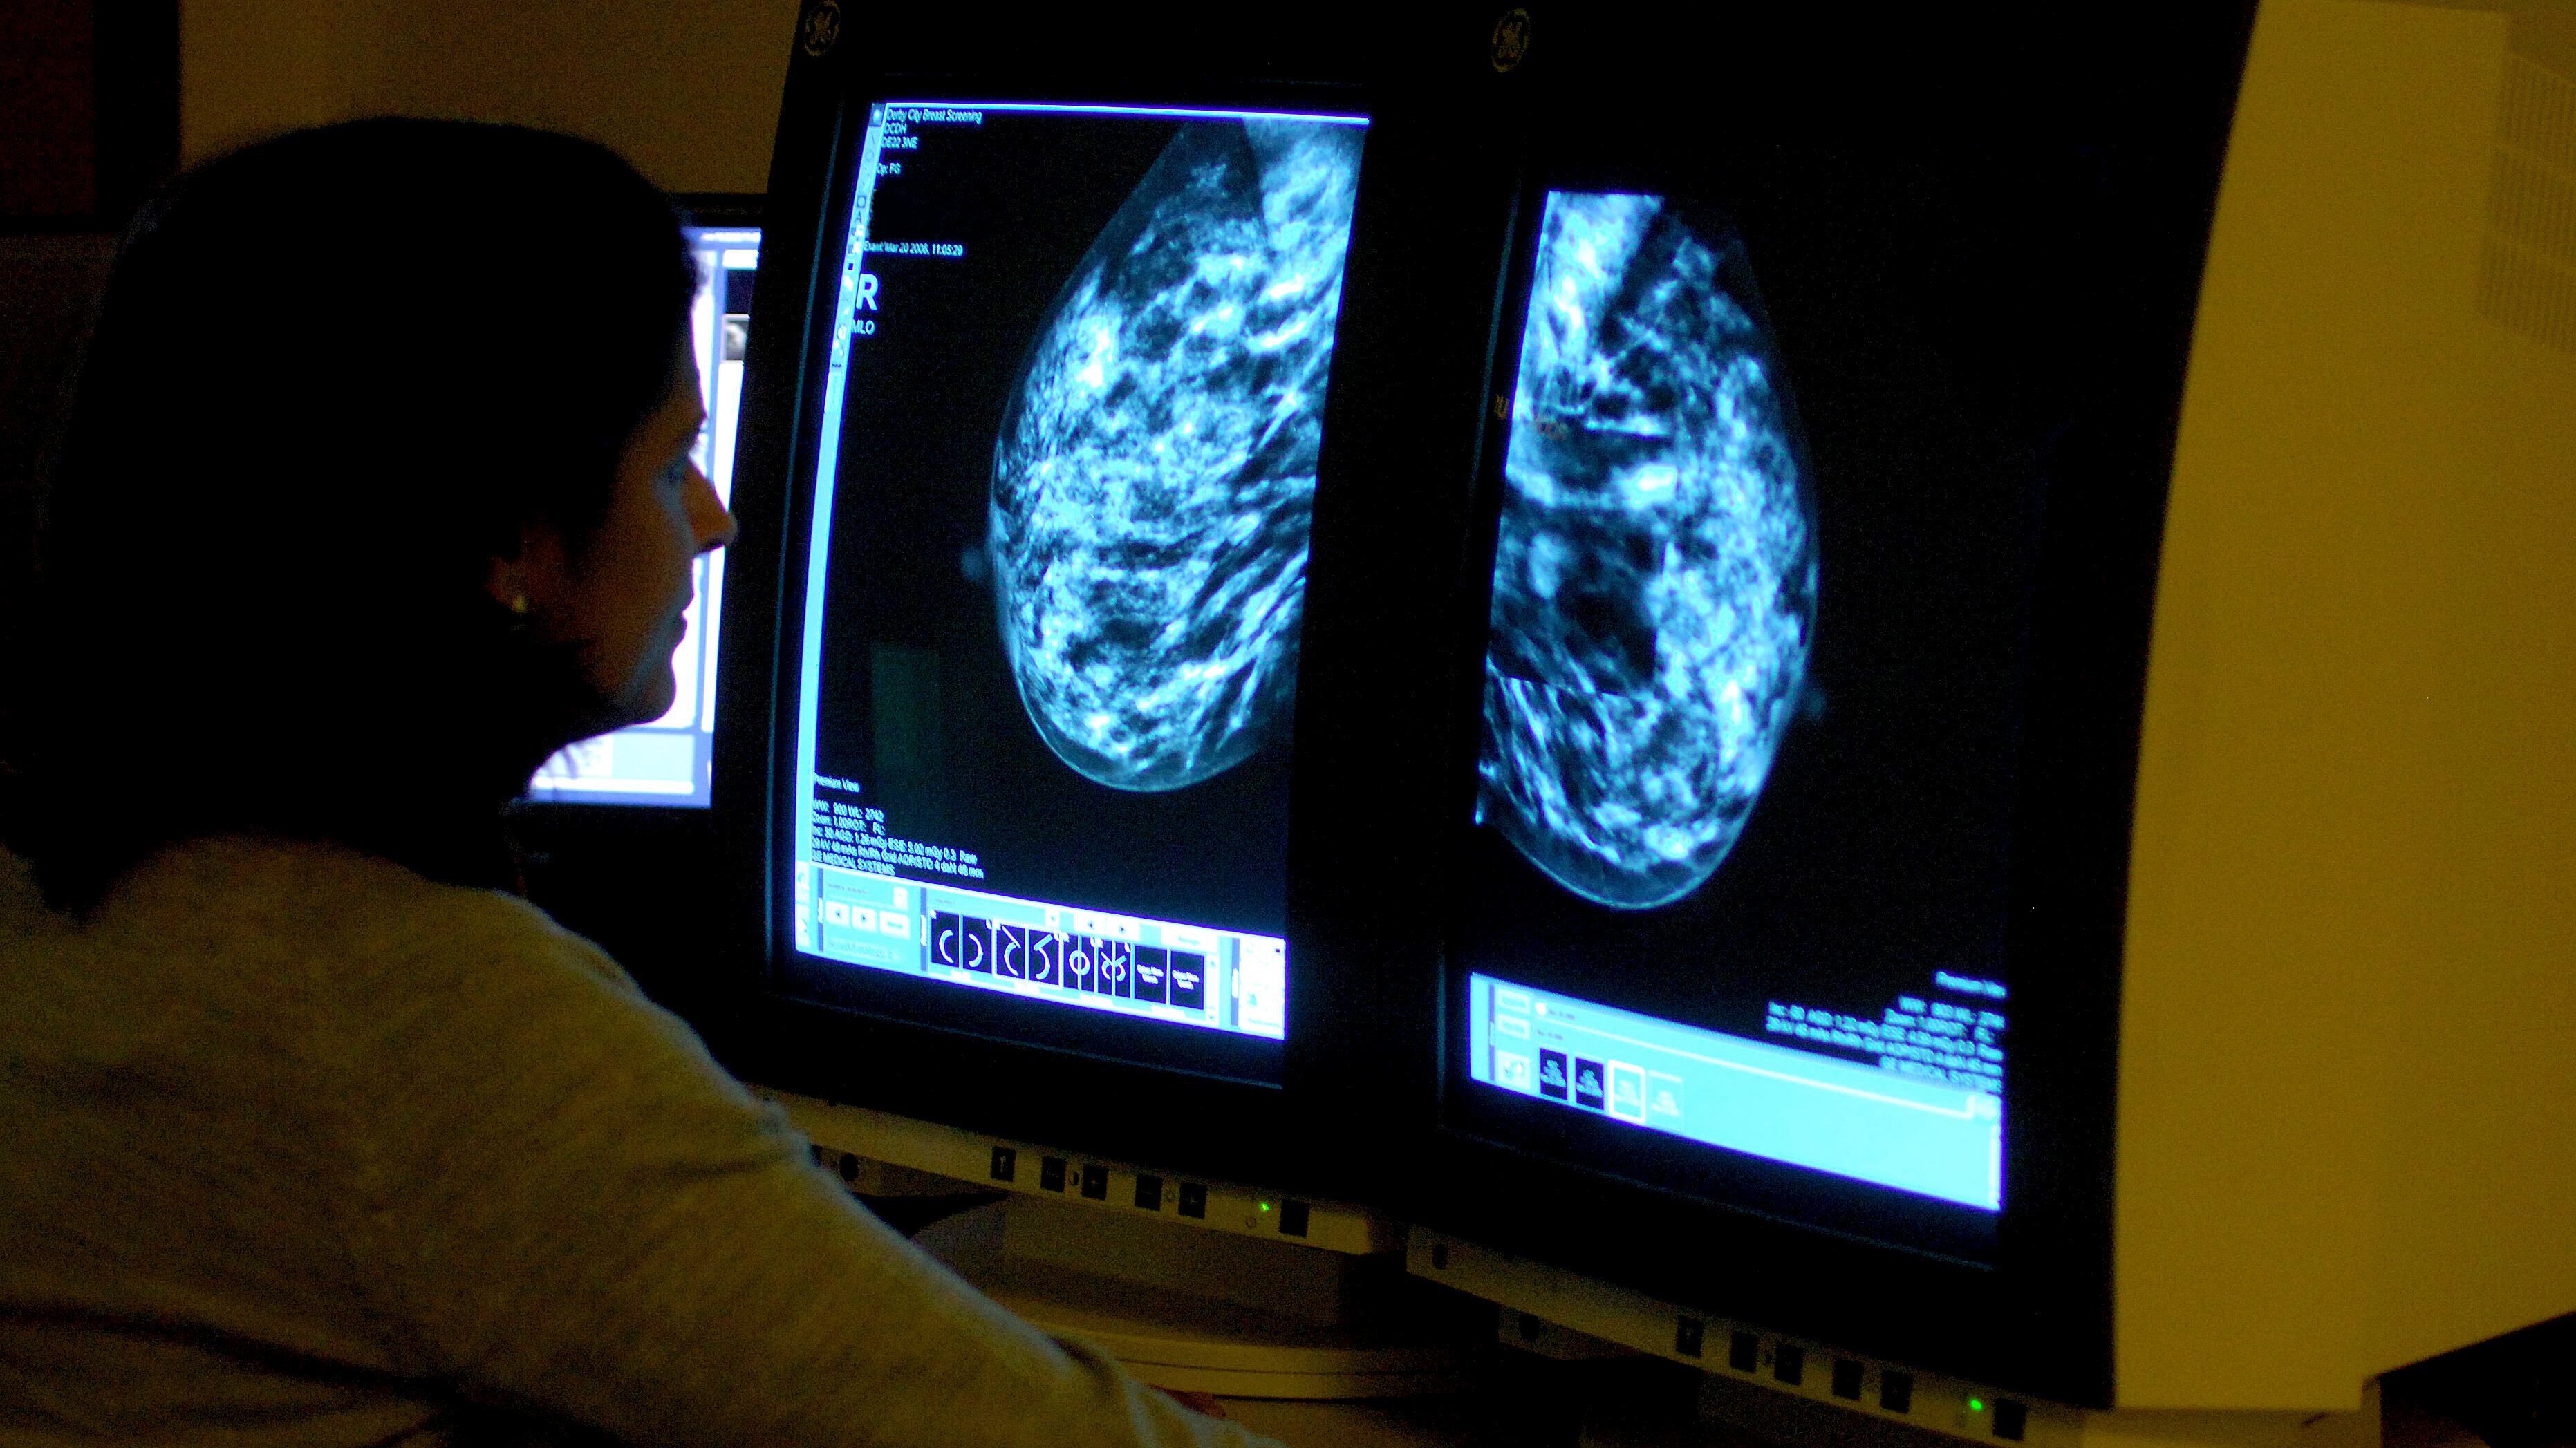 Cancer care is lagging far behind other European countries, data reveals